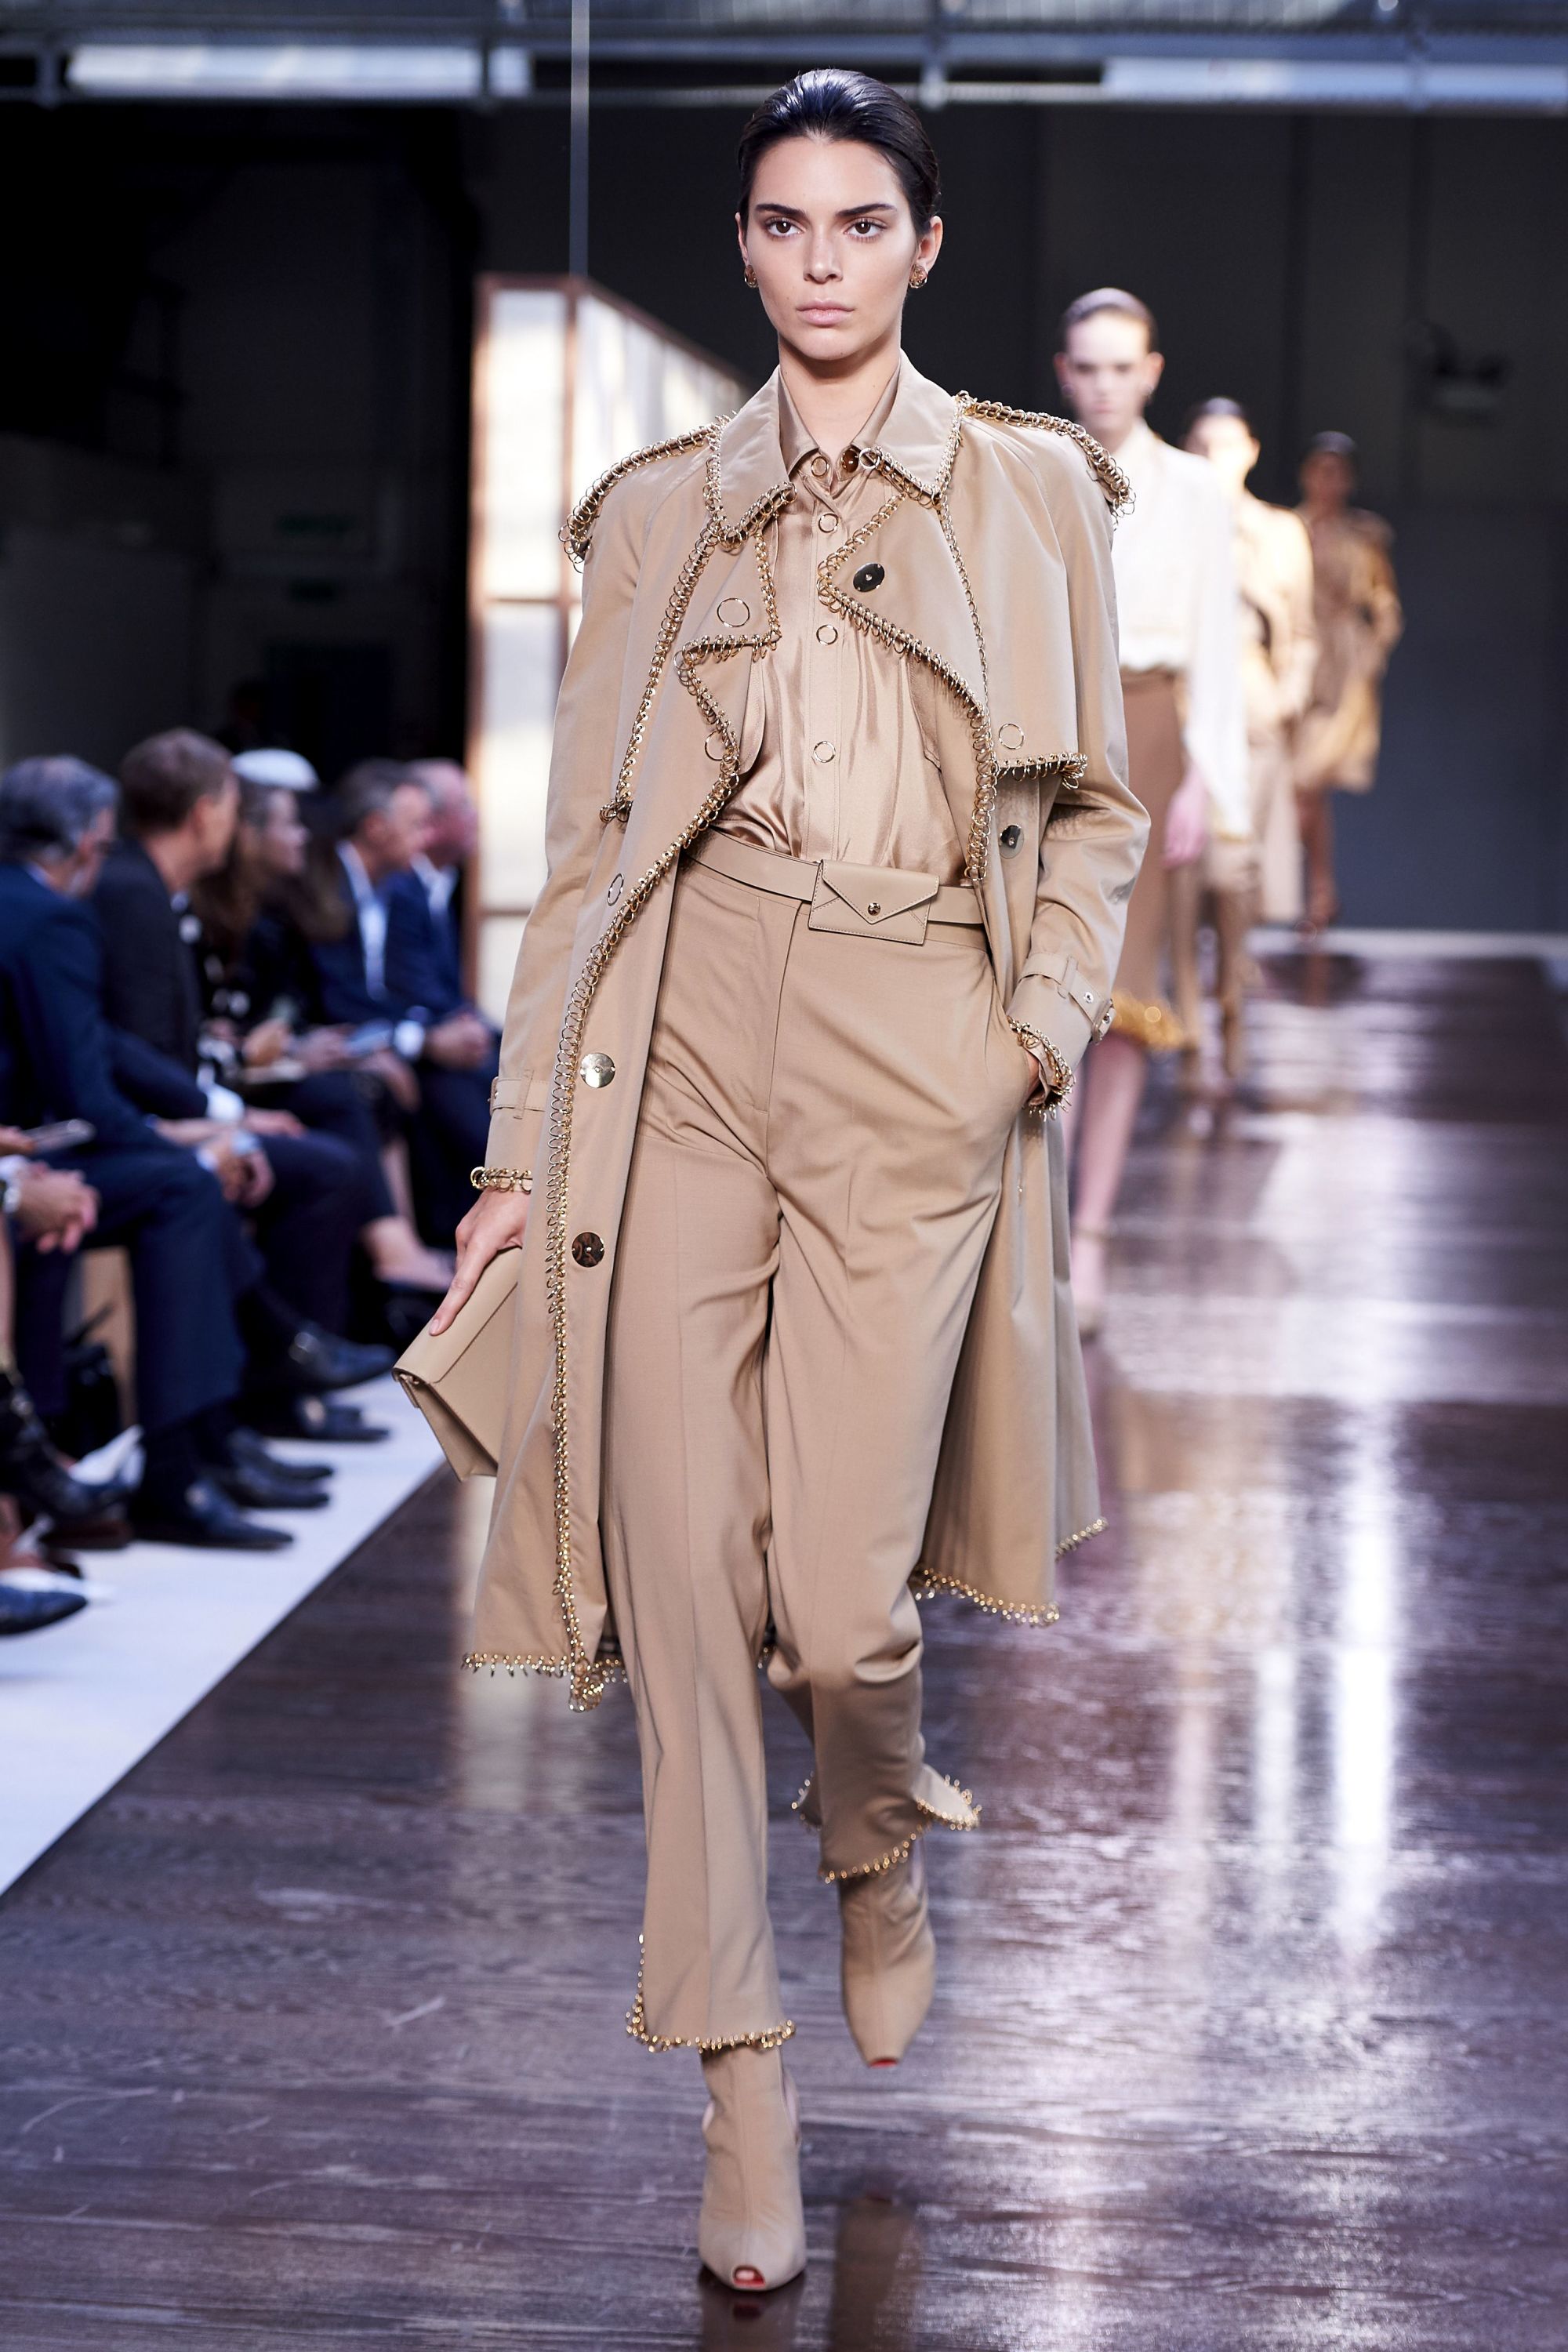 Adidas by Stella McCartney Fall 2015 Ready-to-Wear Collection